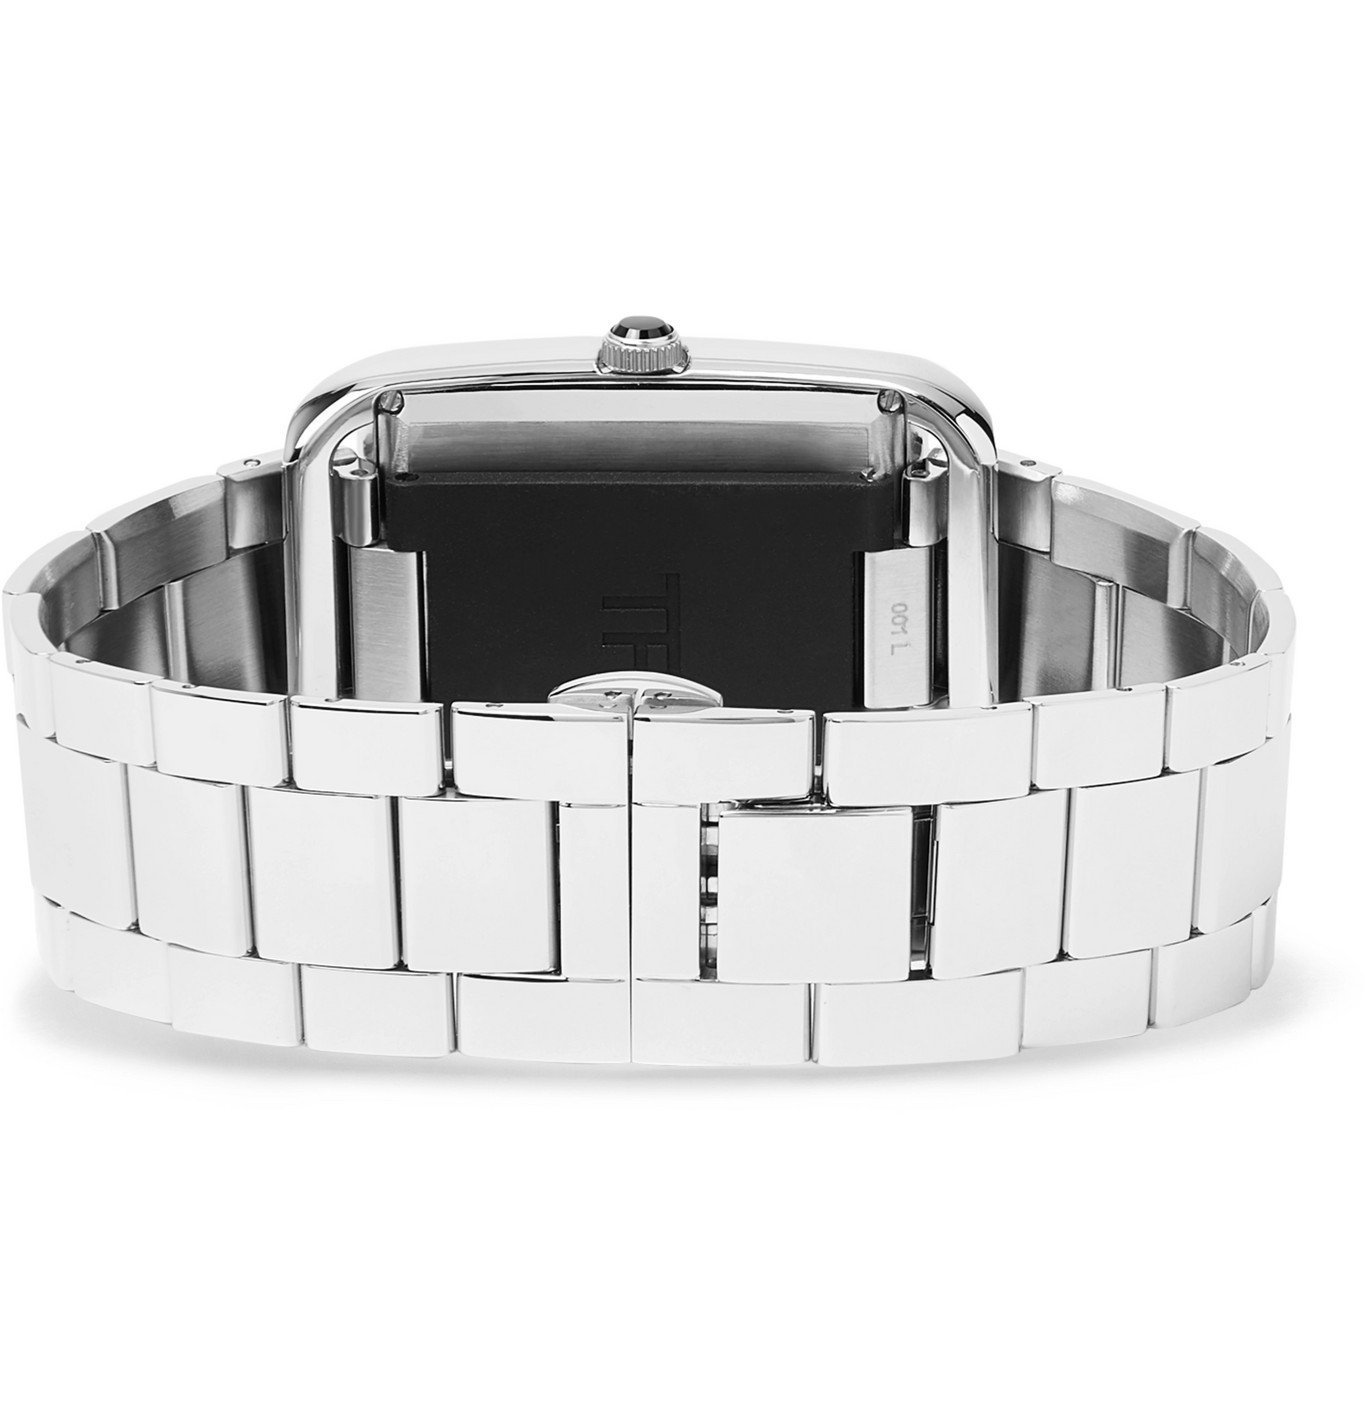 Tom Ford Timepieces - 001 Stainless Steel Watch - Silver Tom Ford Timepieces